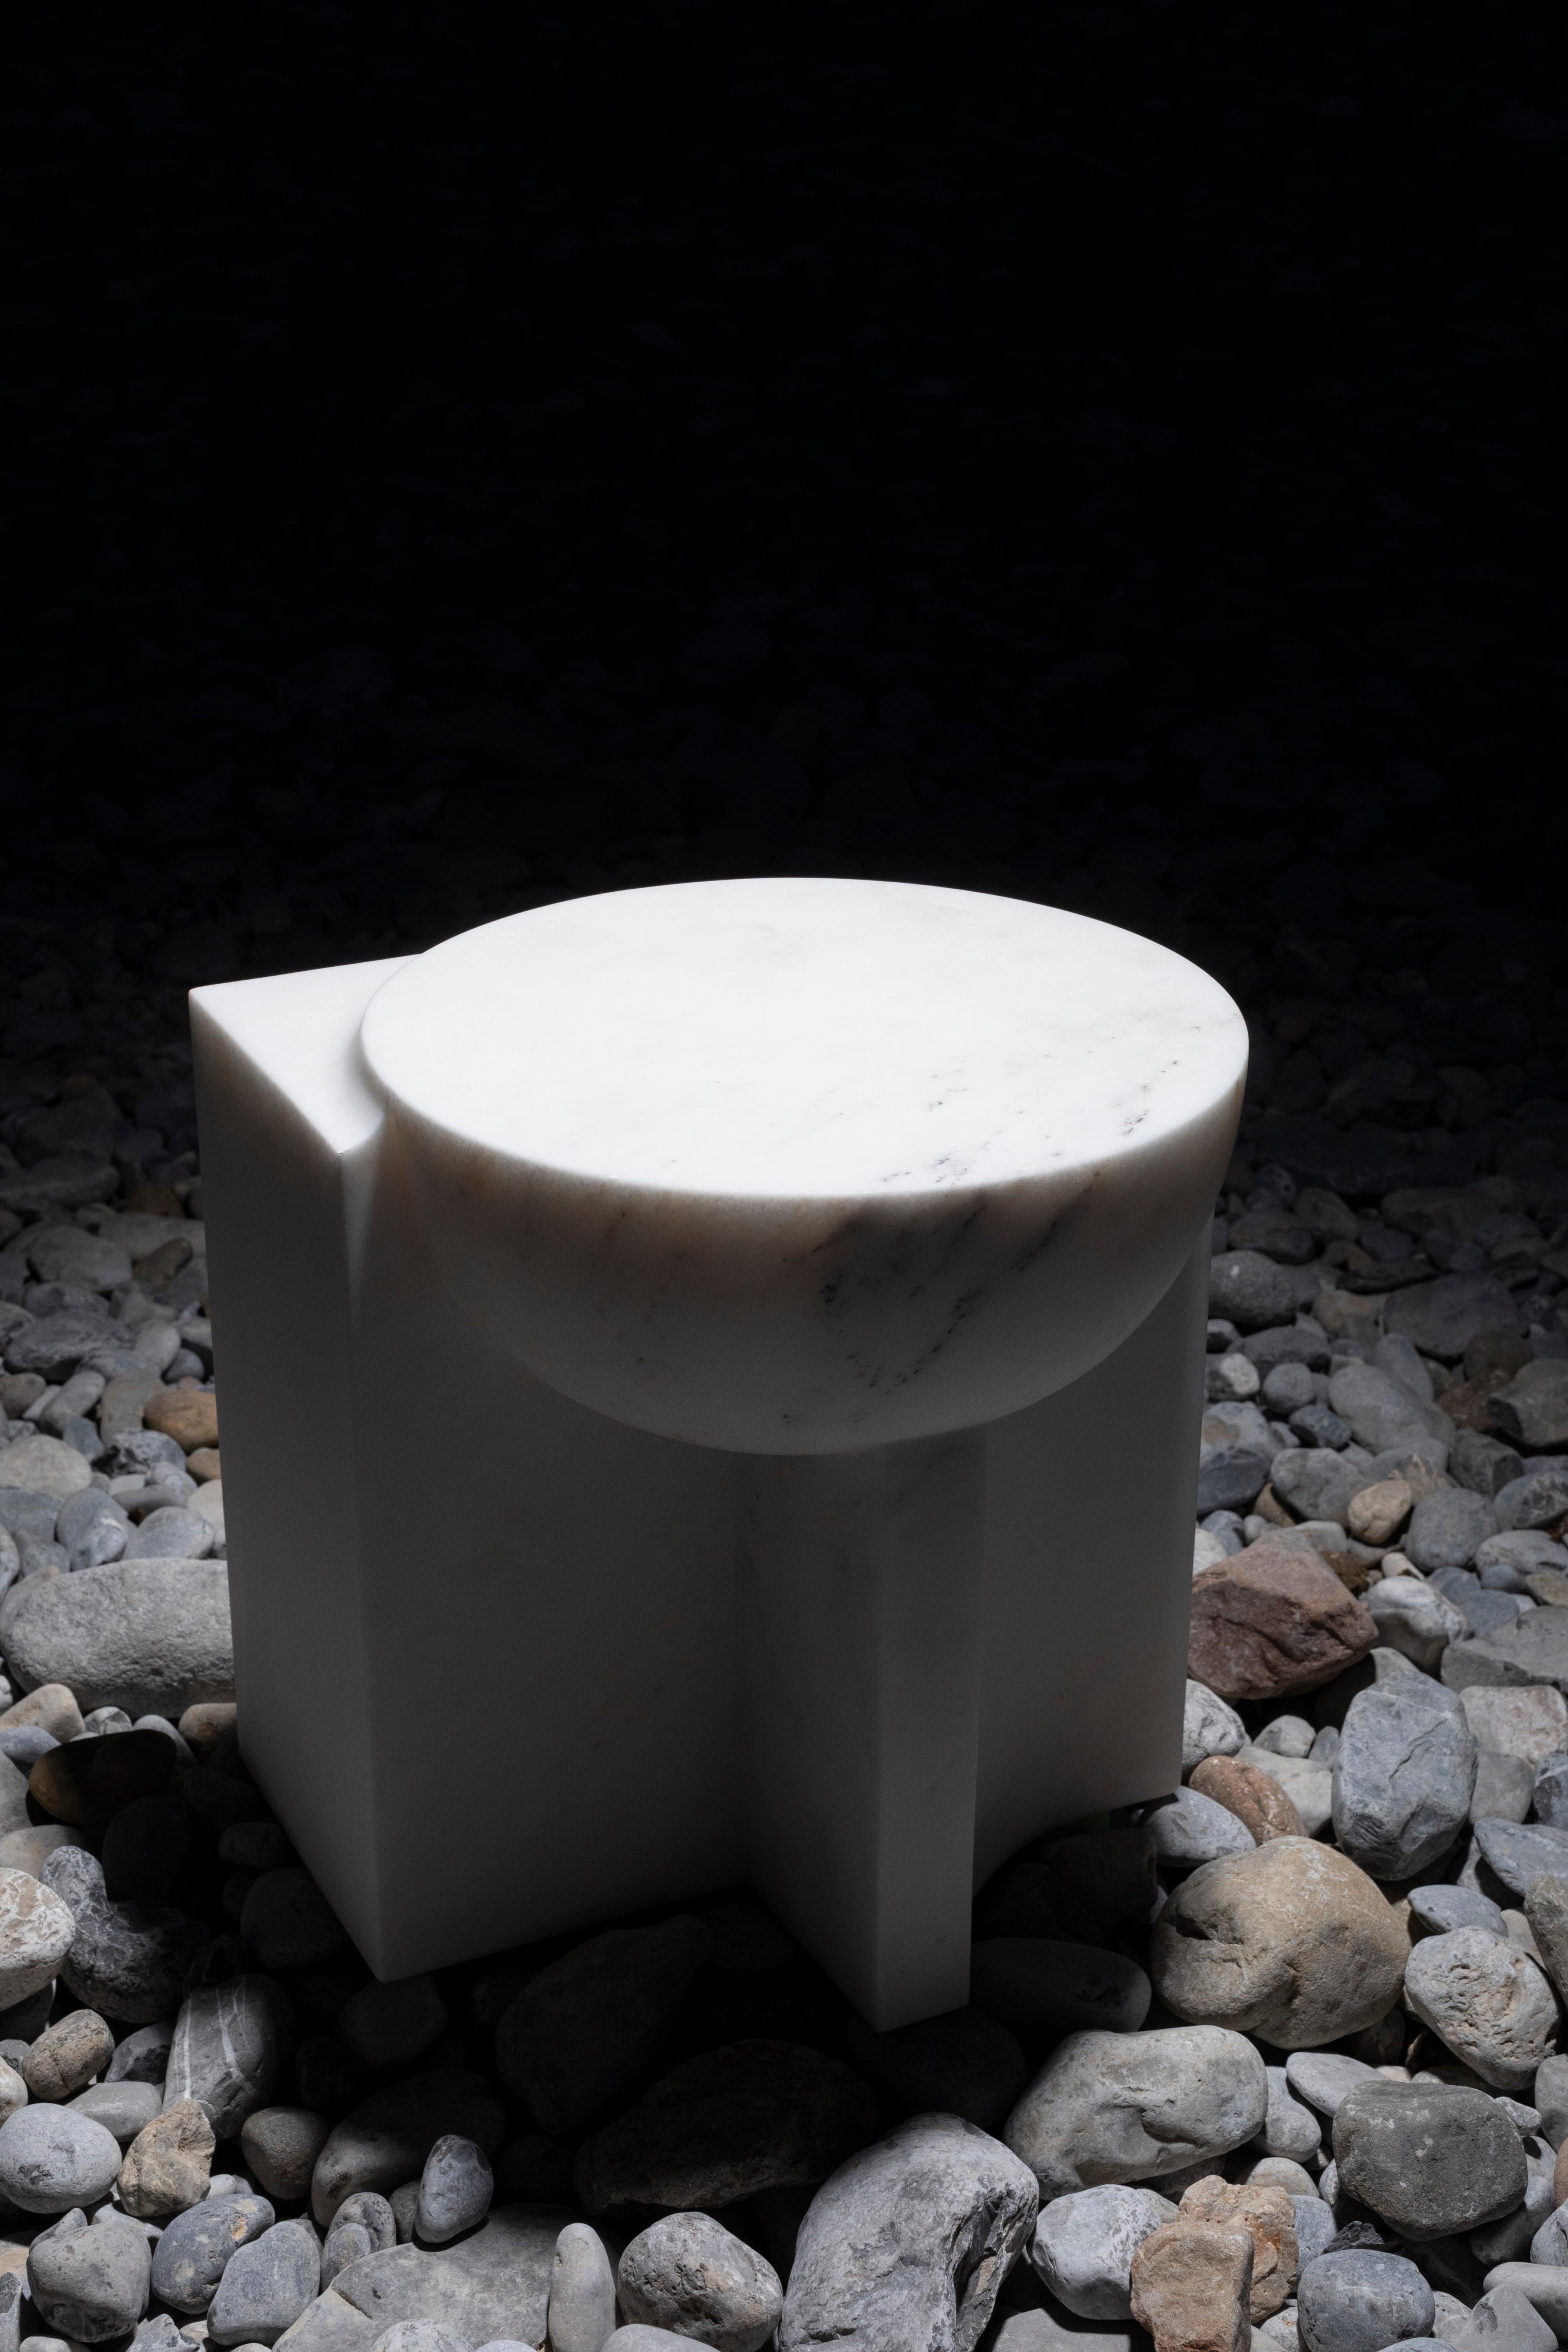 Alabaster Banquito Galeana Stool by Jorge Diego Etienne For Sale